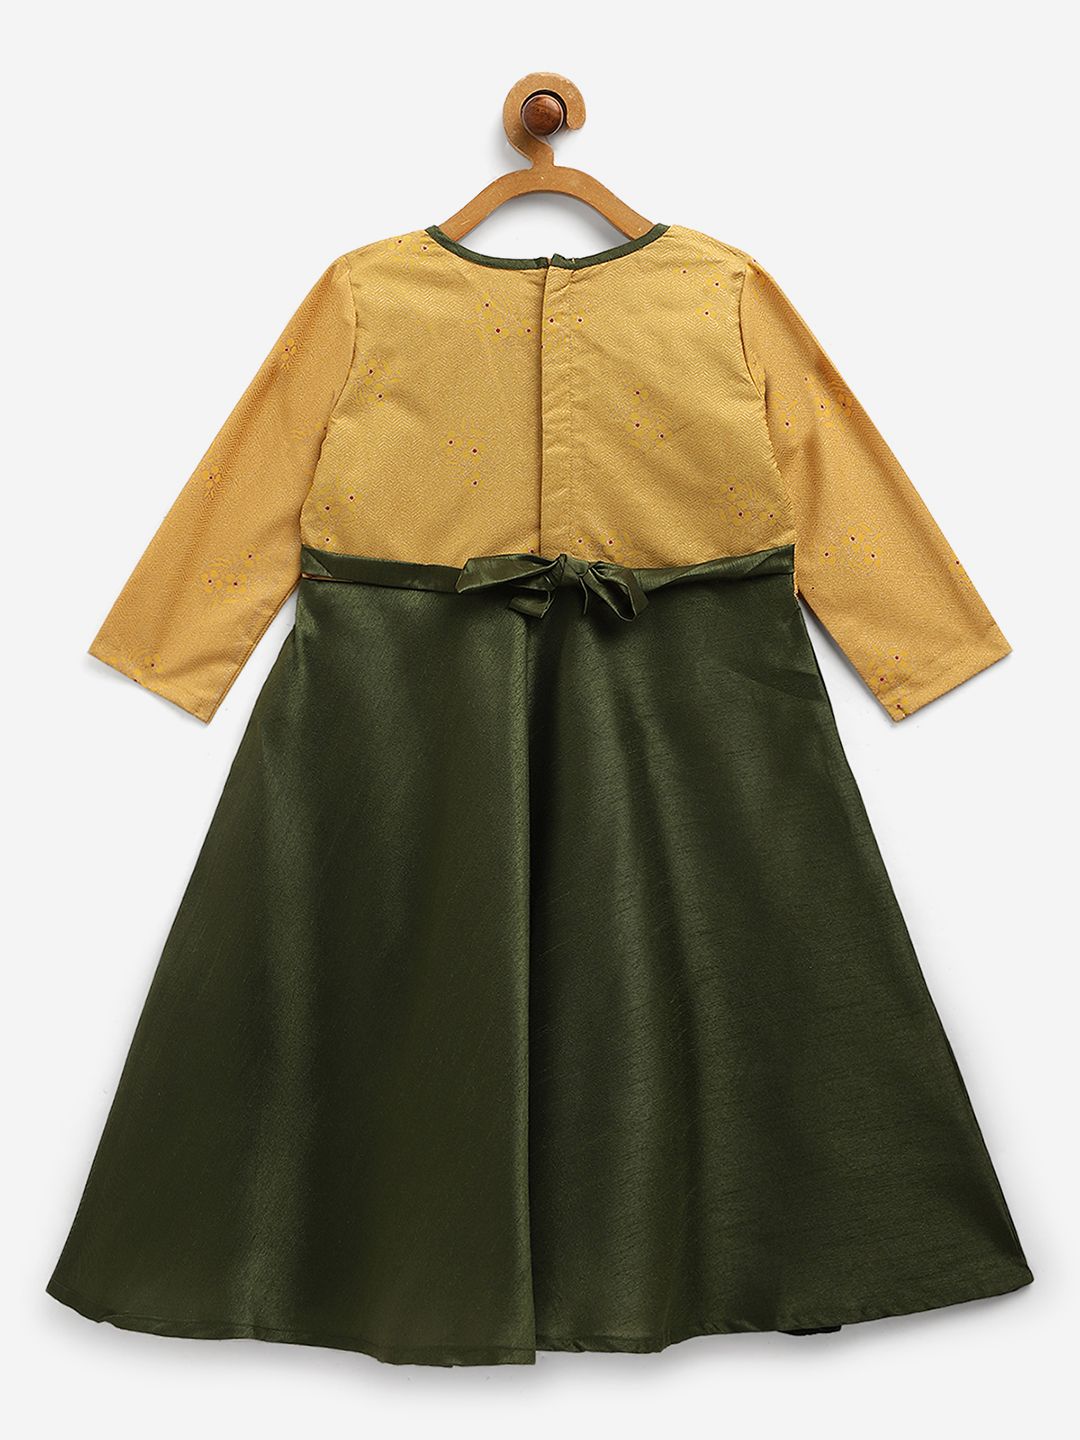 Green Poly Silk Solid Girls Dress With Printed Jacket